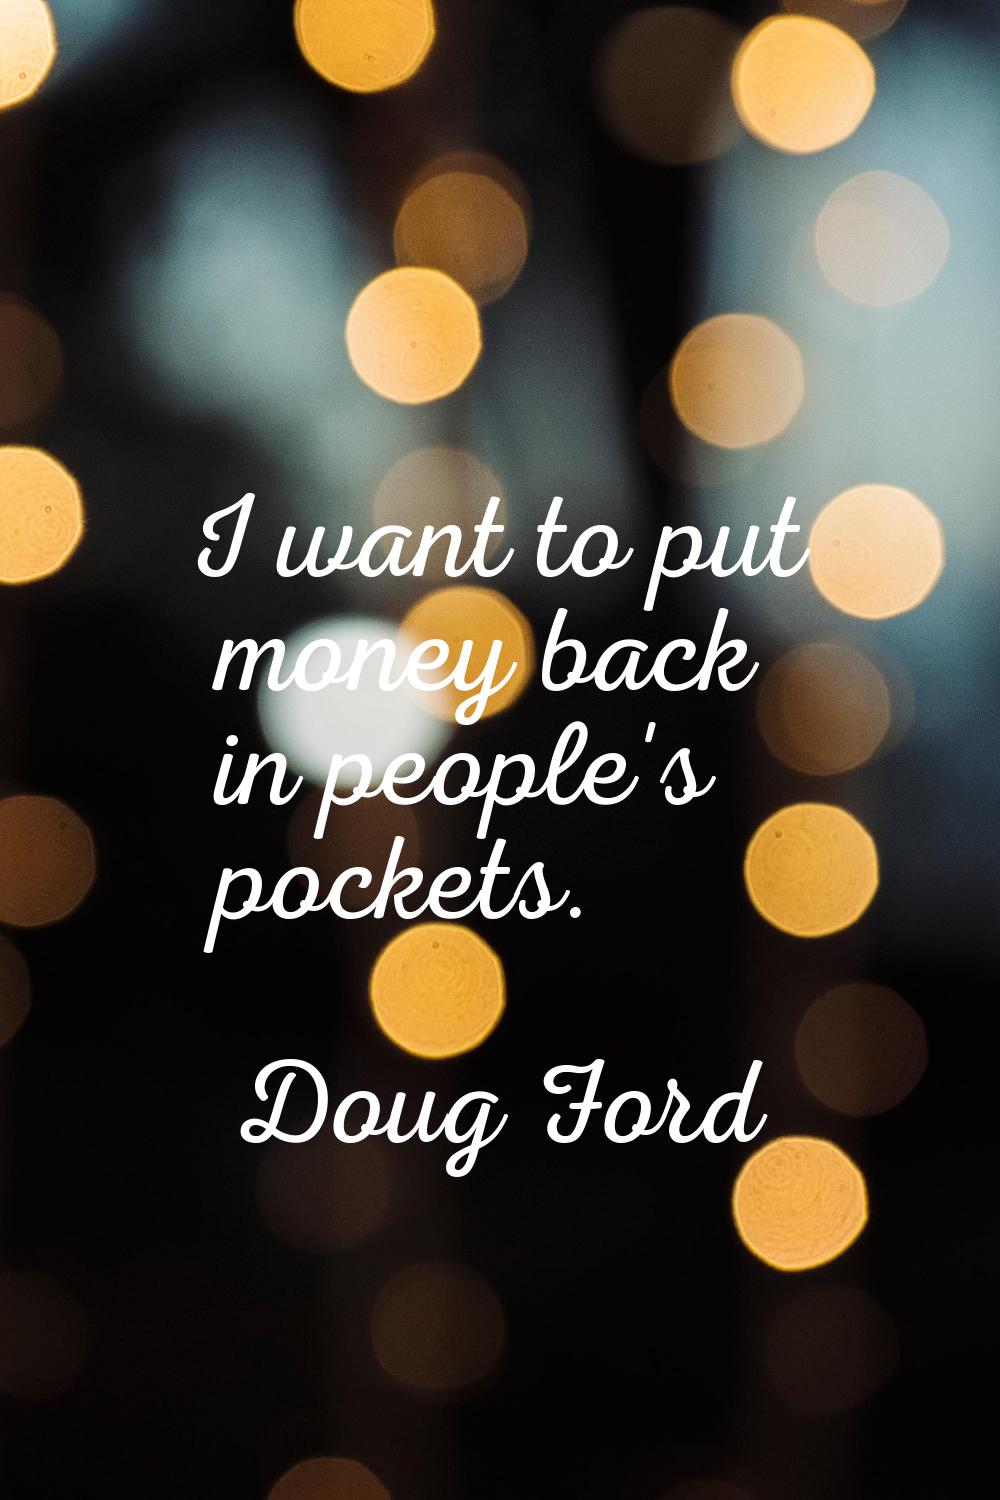 I want to put money back in people's pockets.